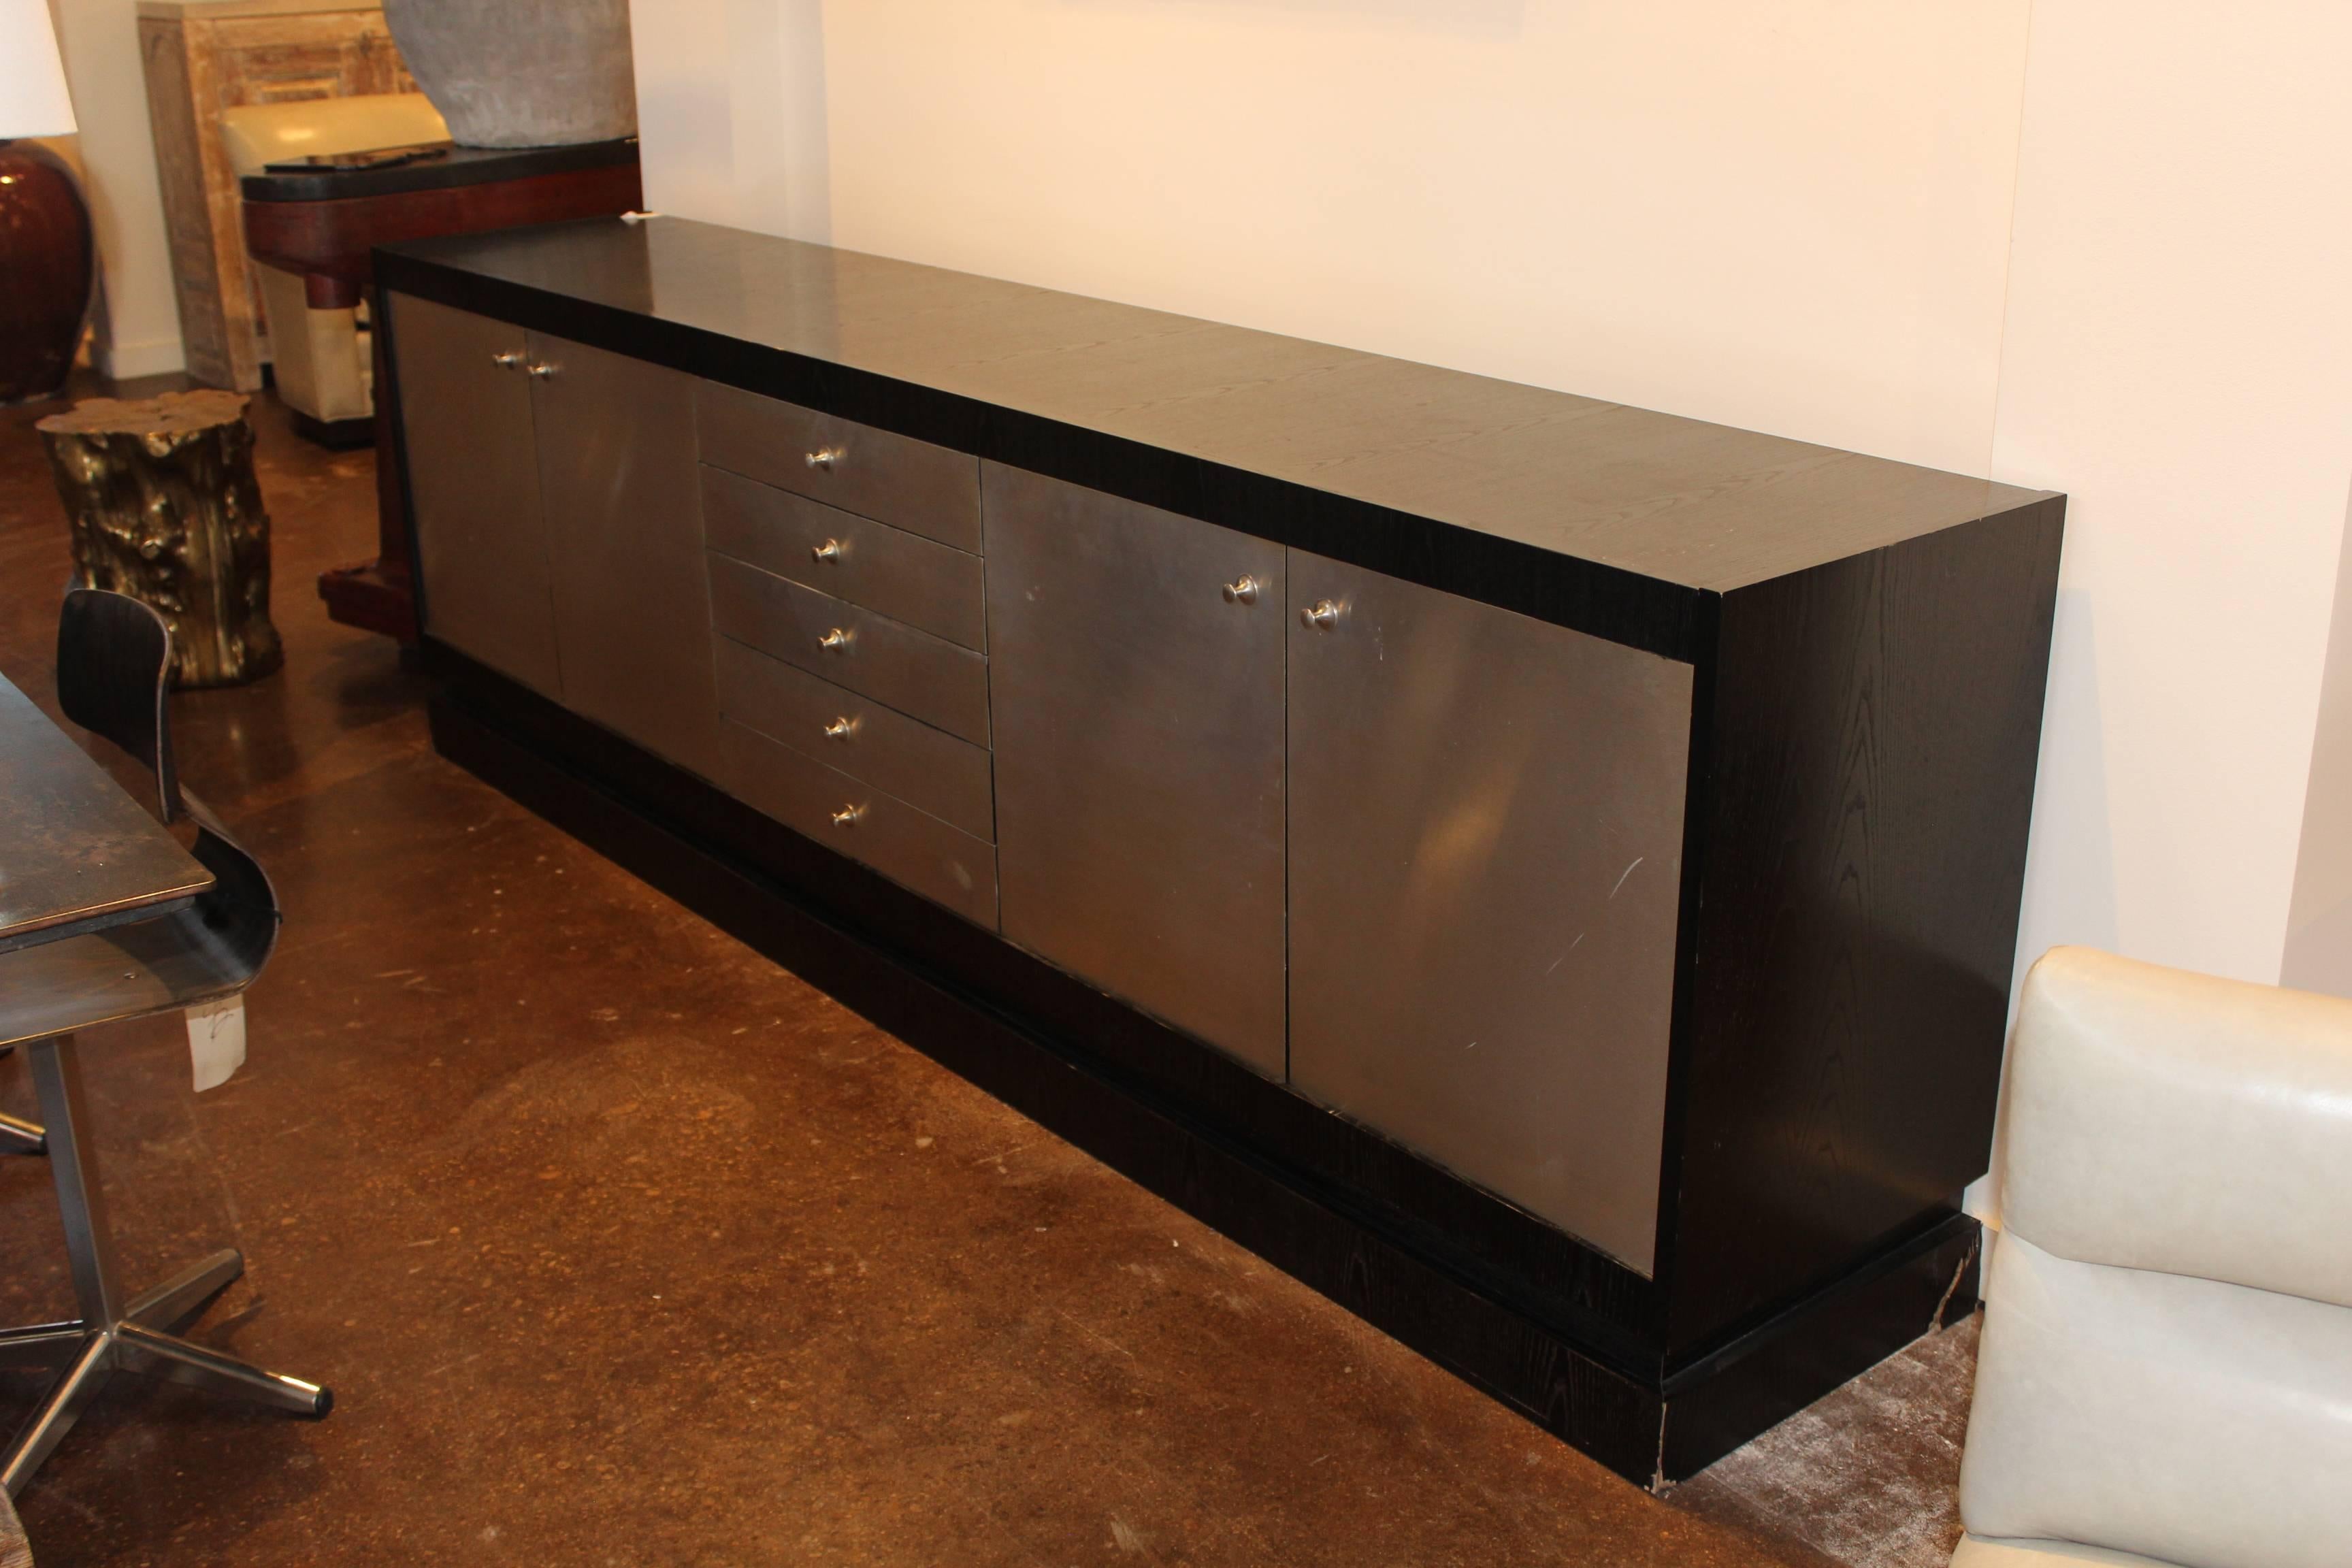 Ebonized French oak Mid-Century server with brushed stainless steel on doors and drawers.